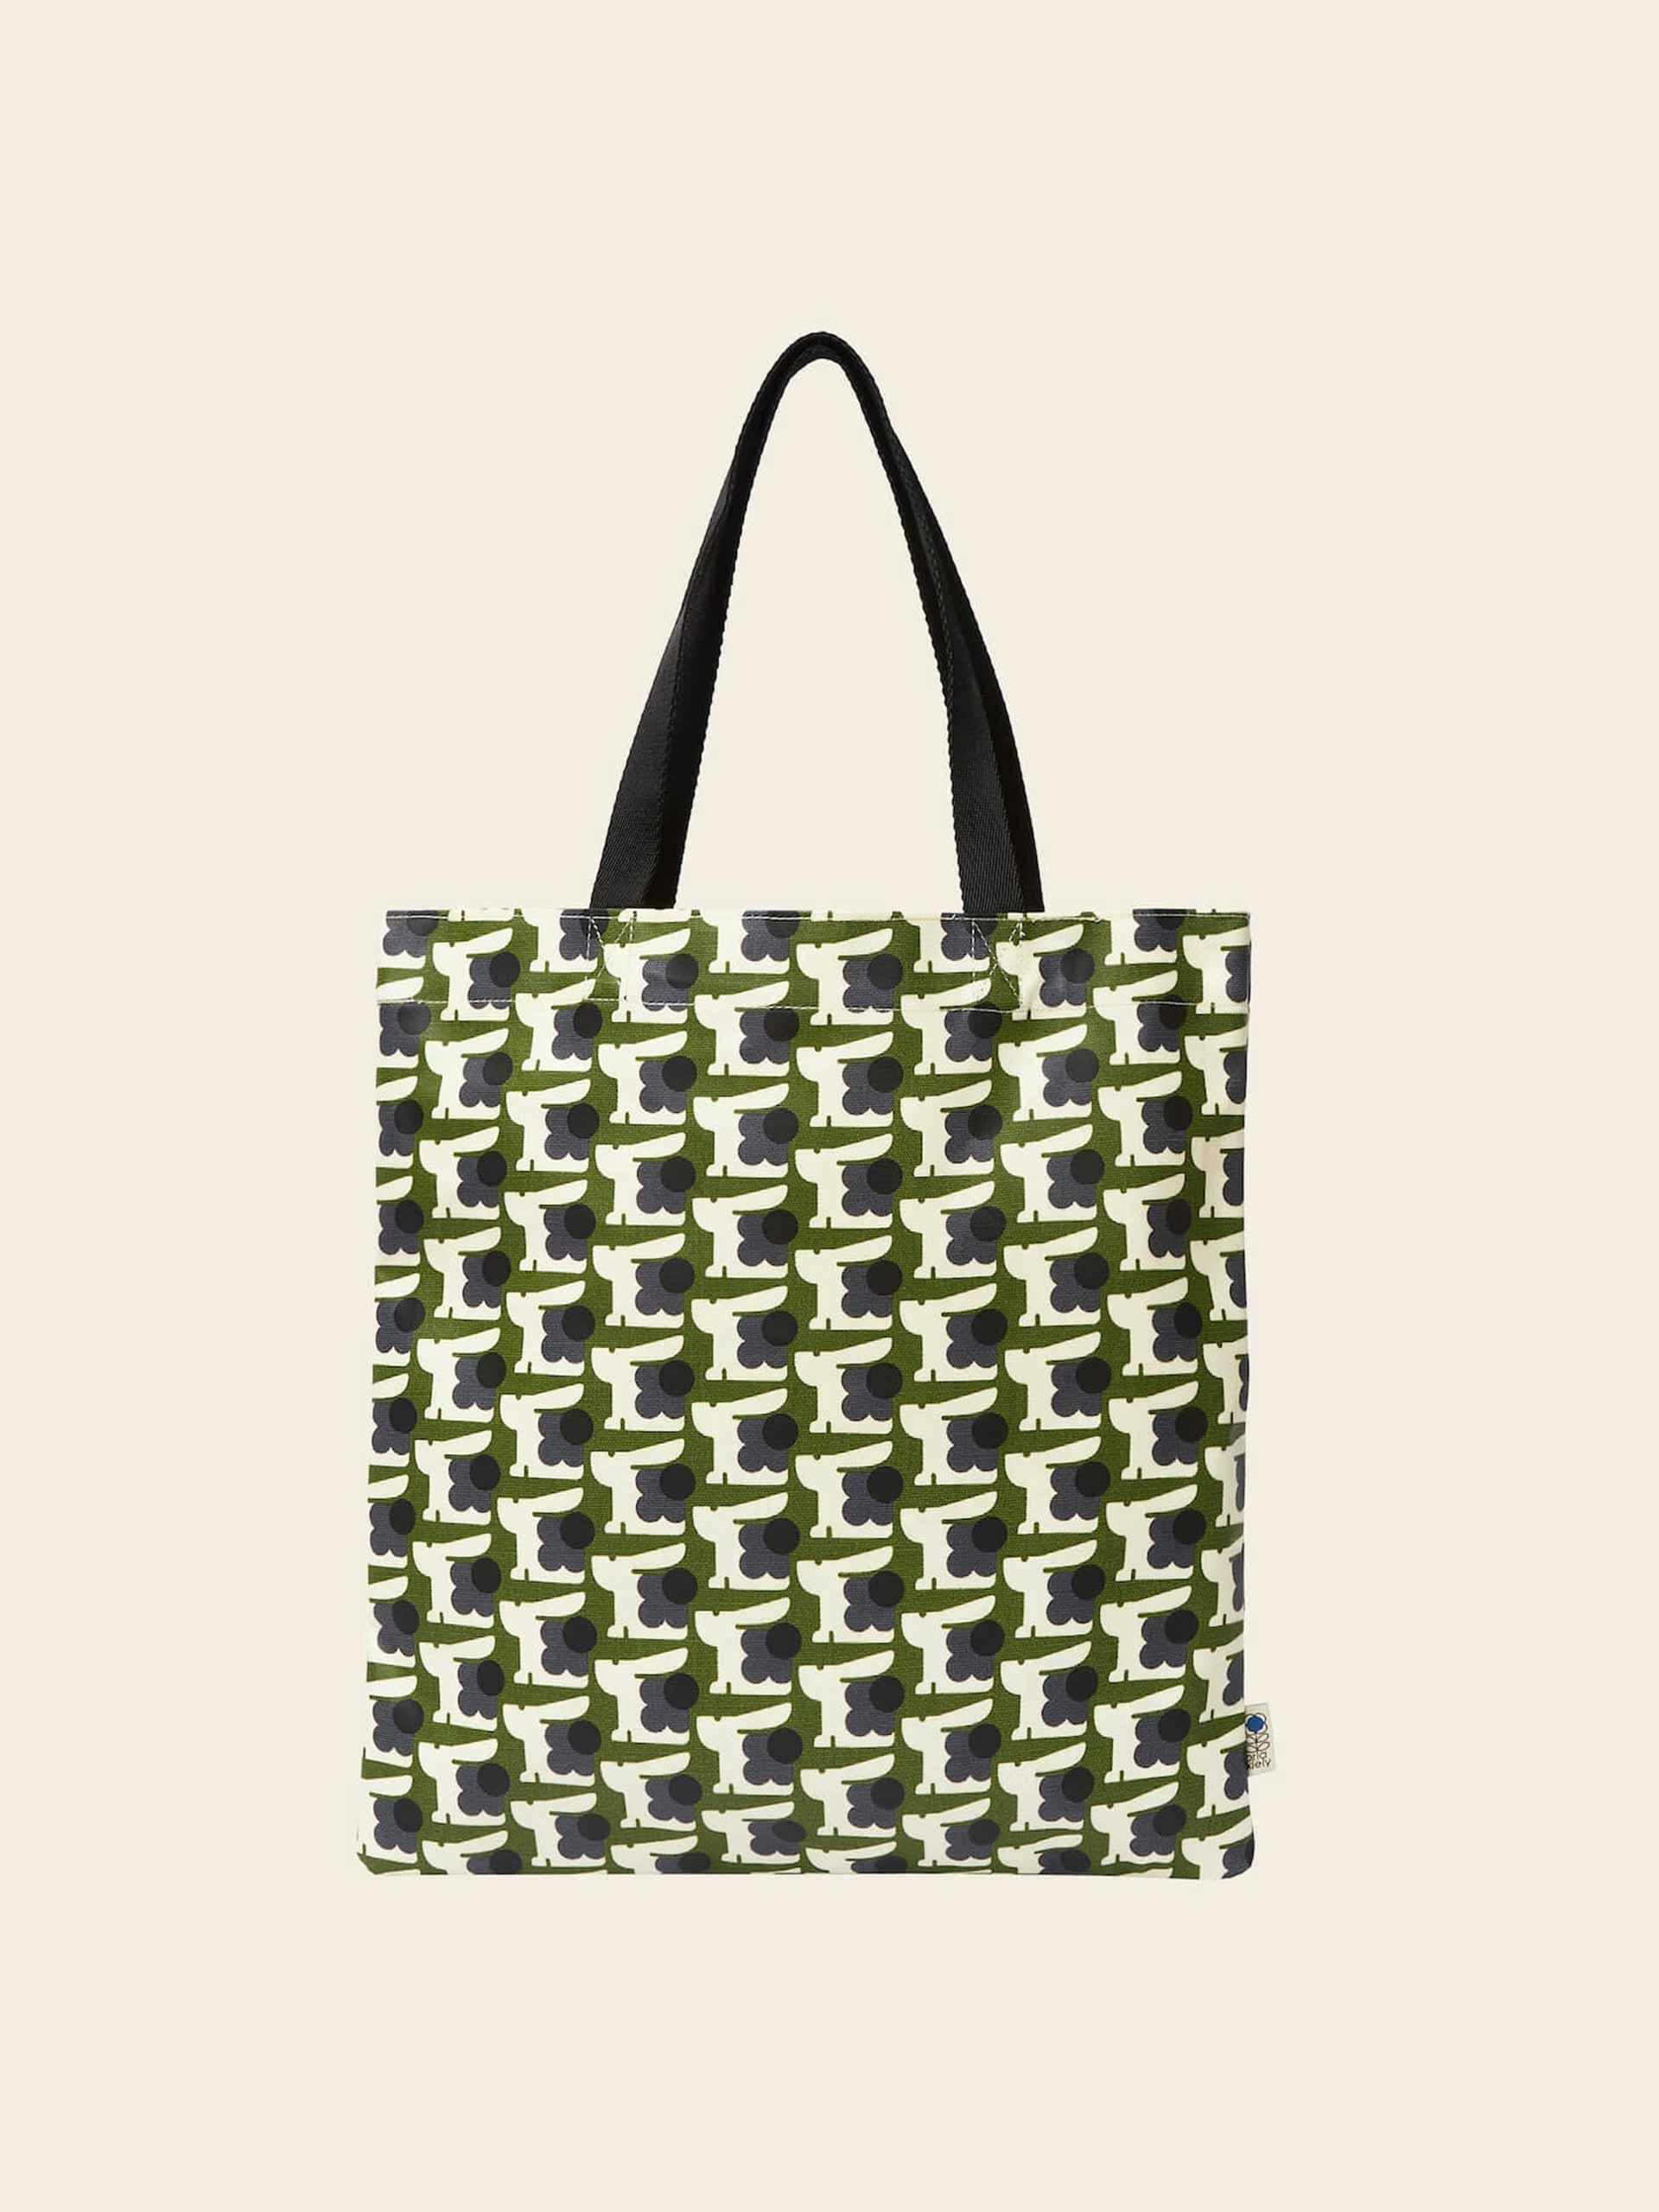 Museum tote in Baby Bunny Grass